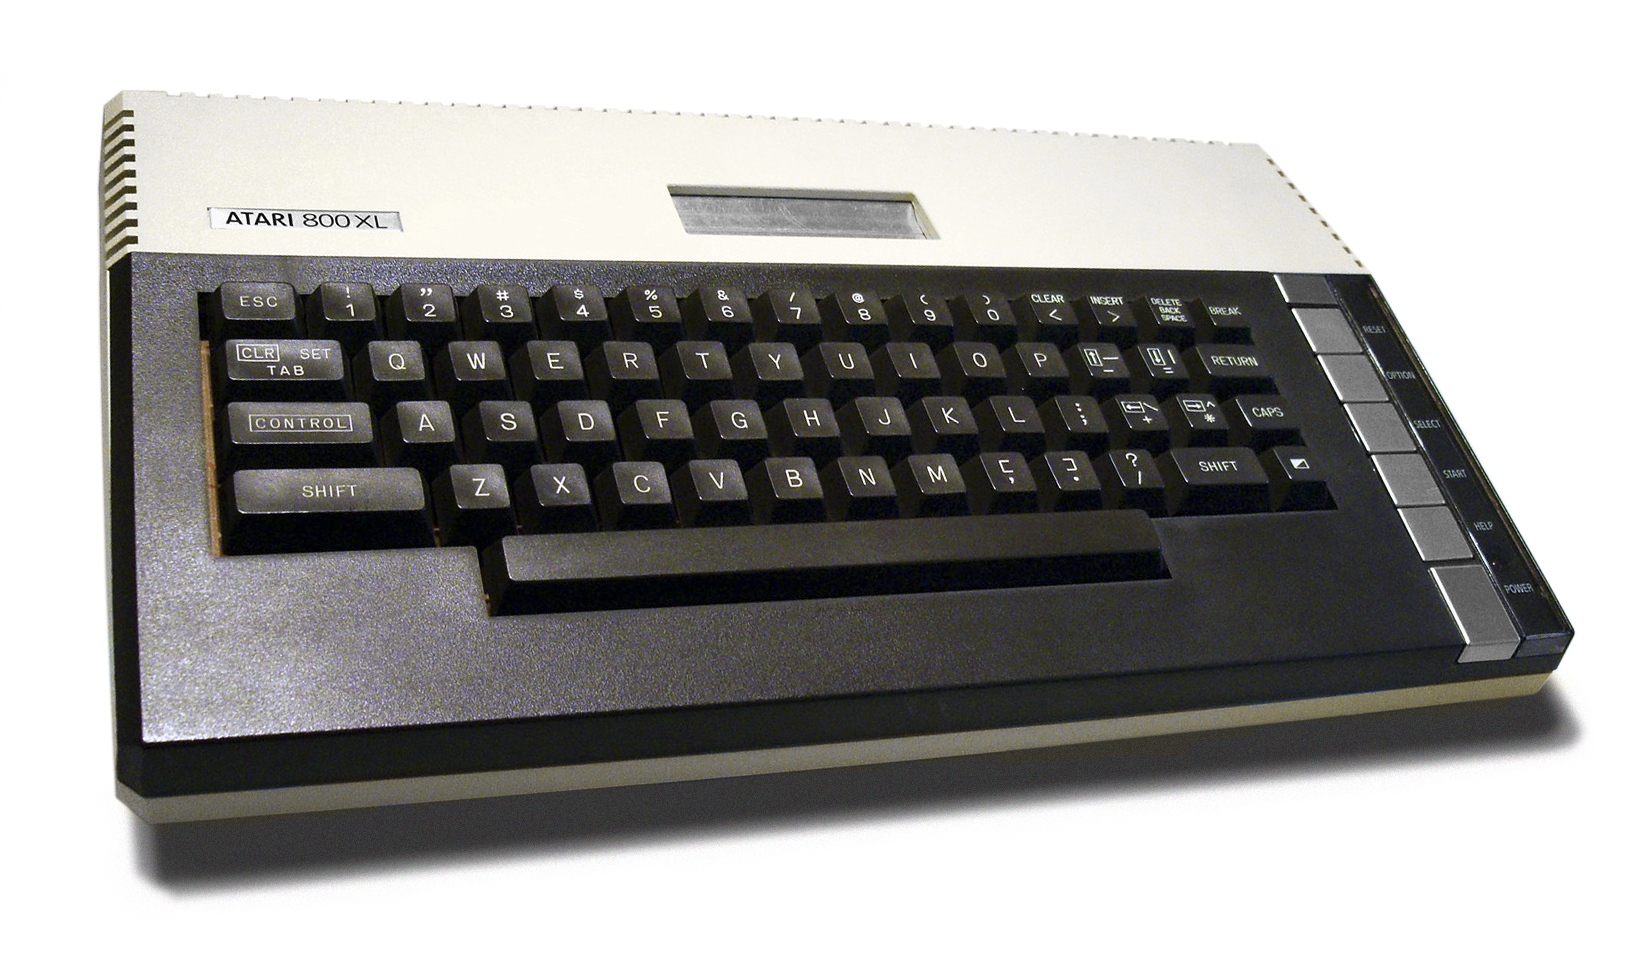 By 1986 the first home computer was bought, the Atari 800xl 8-bit machine.